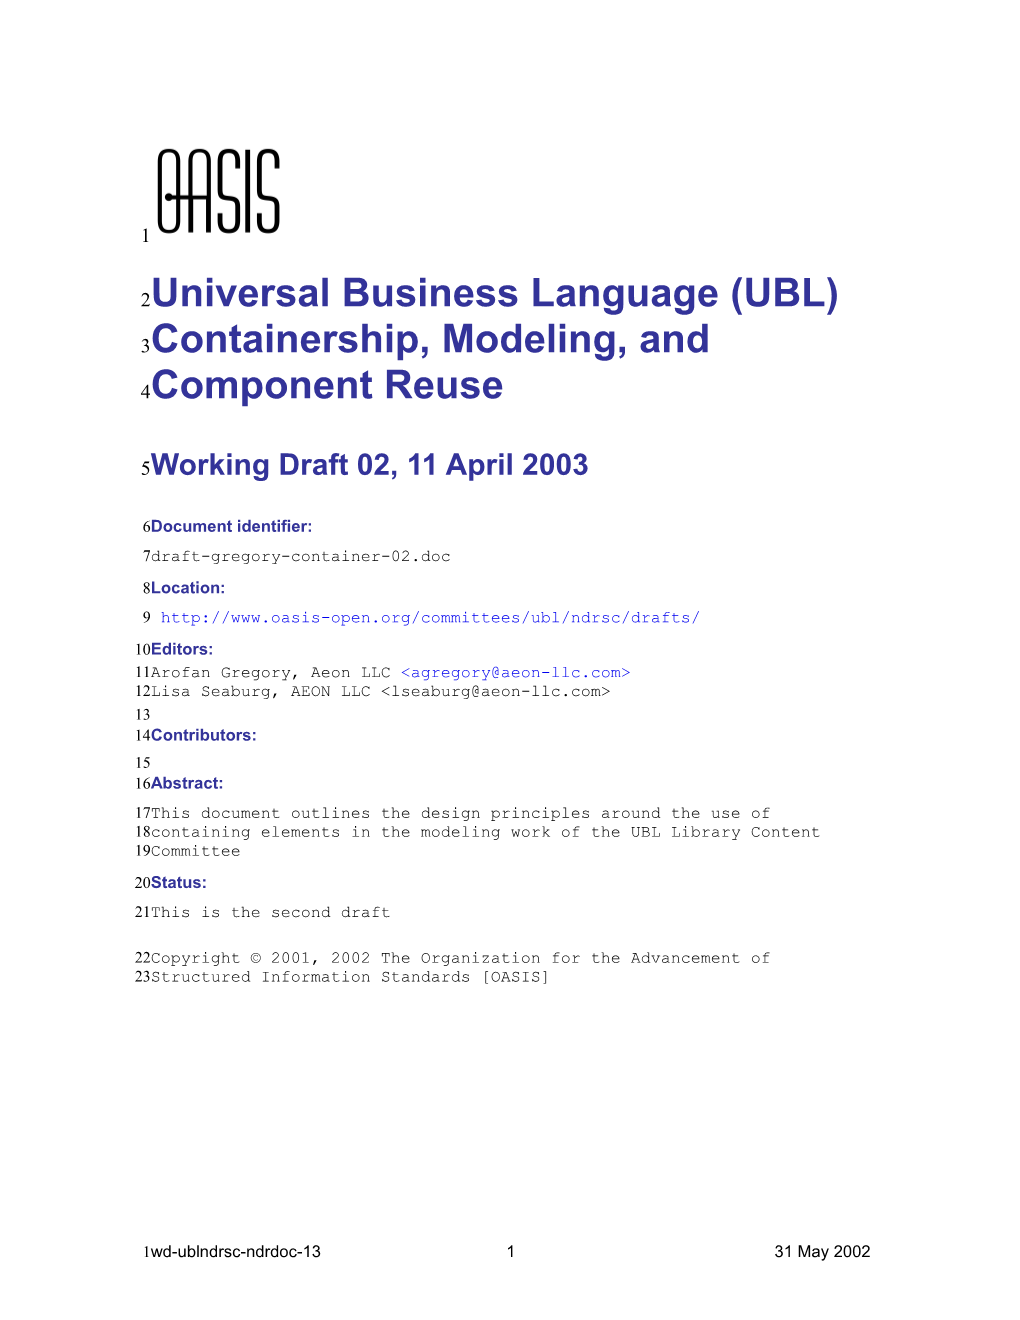 Universal Business Language (UBL) Containership, Modeling, and Component Reuse